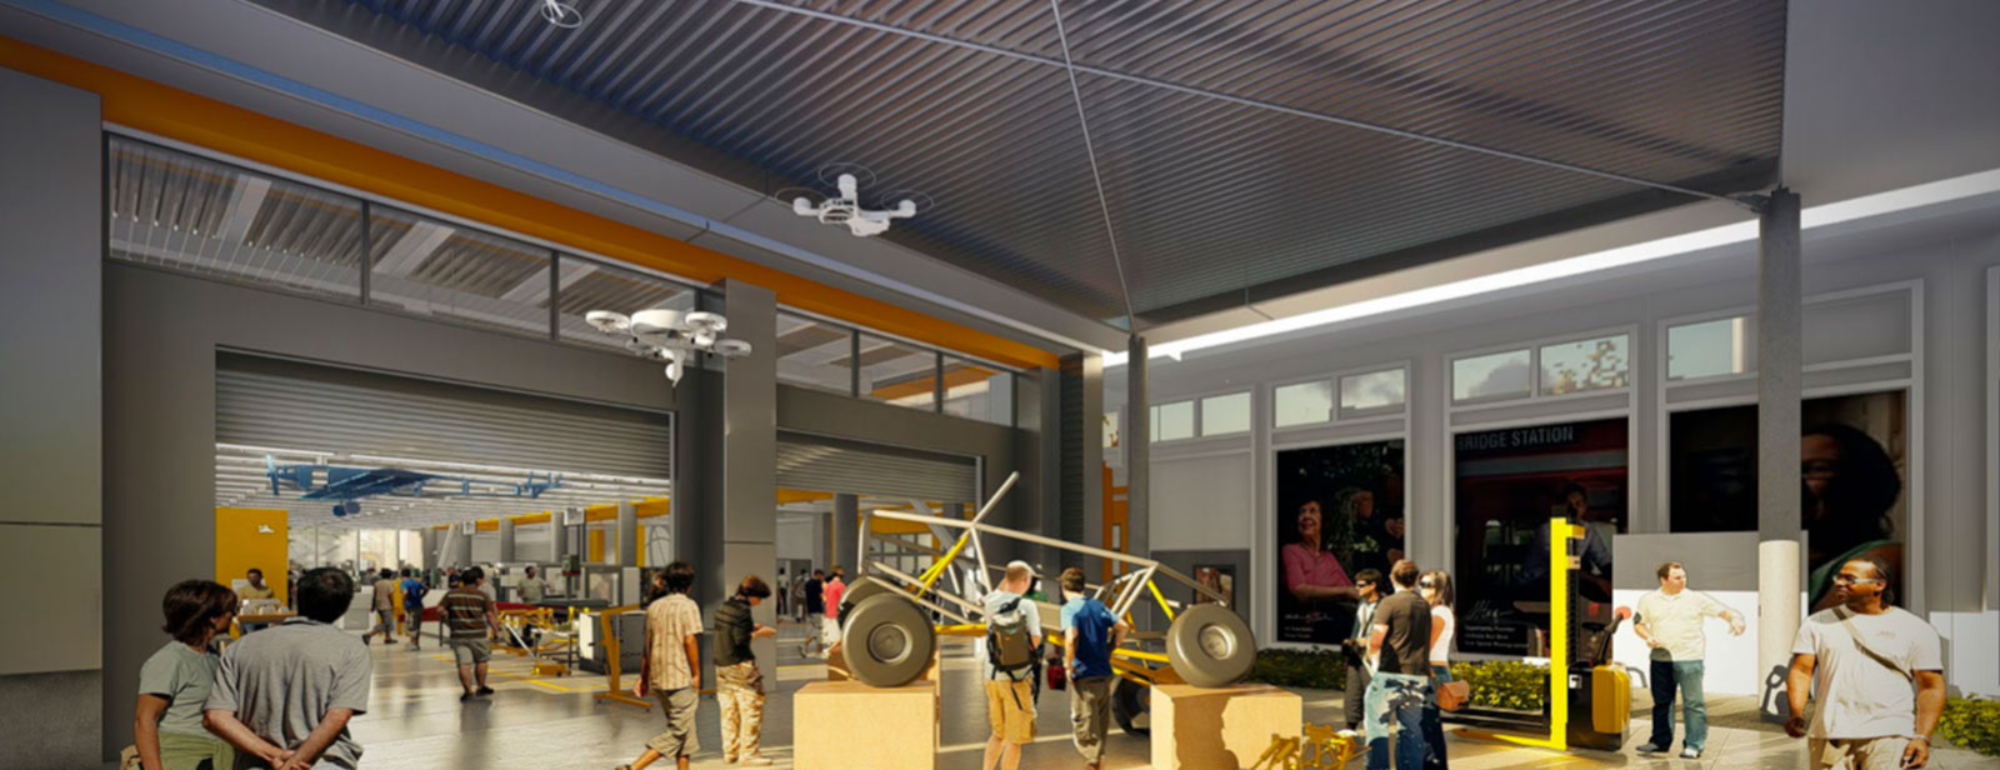 Rendering of the Diane Bryant Engineering Student Design Center